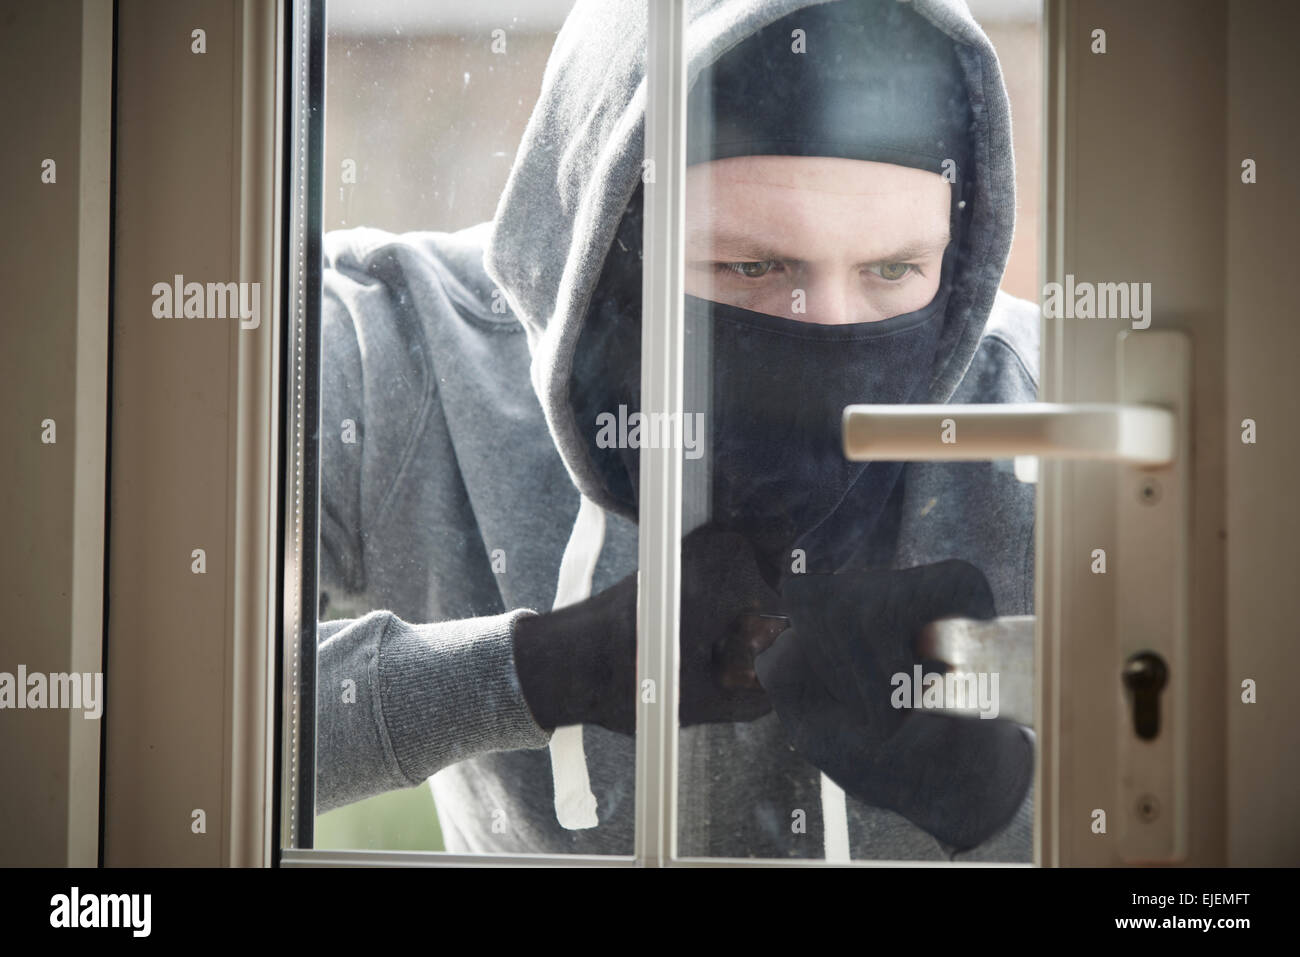 Burglar Breaking Into House By Forcing Door With Crowbar Stock Photo